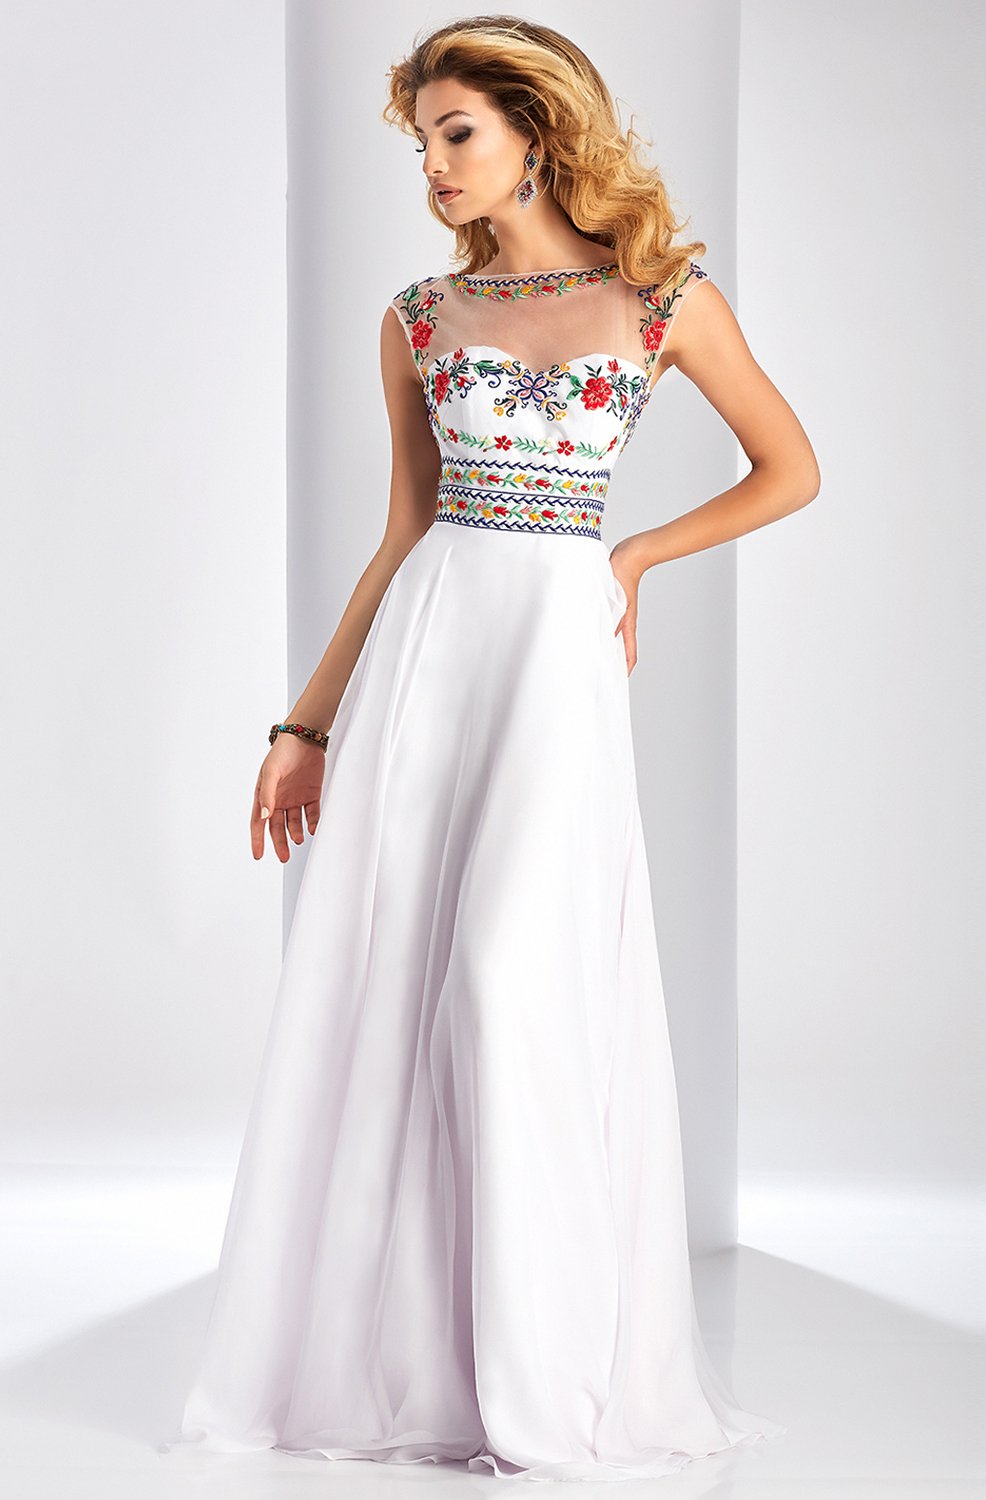 Clarisse - 3050 Floral Embroidery Sheer Neck Flowy A-Line Gown In White and Muilti-Color